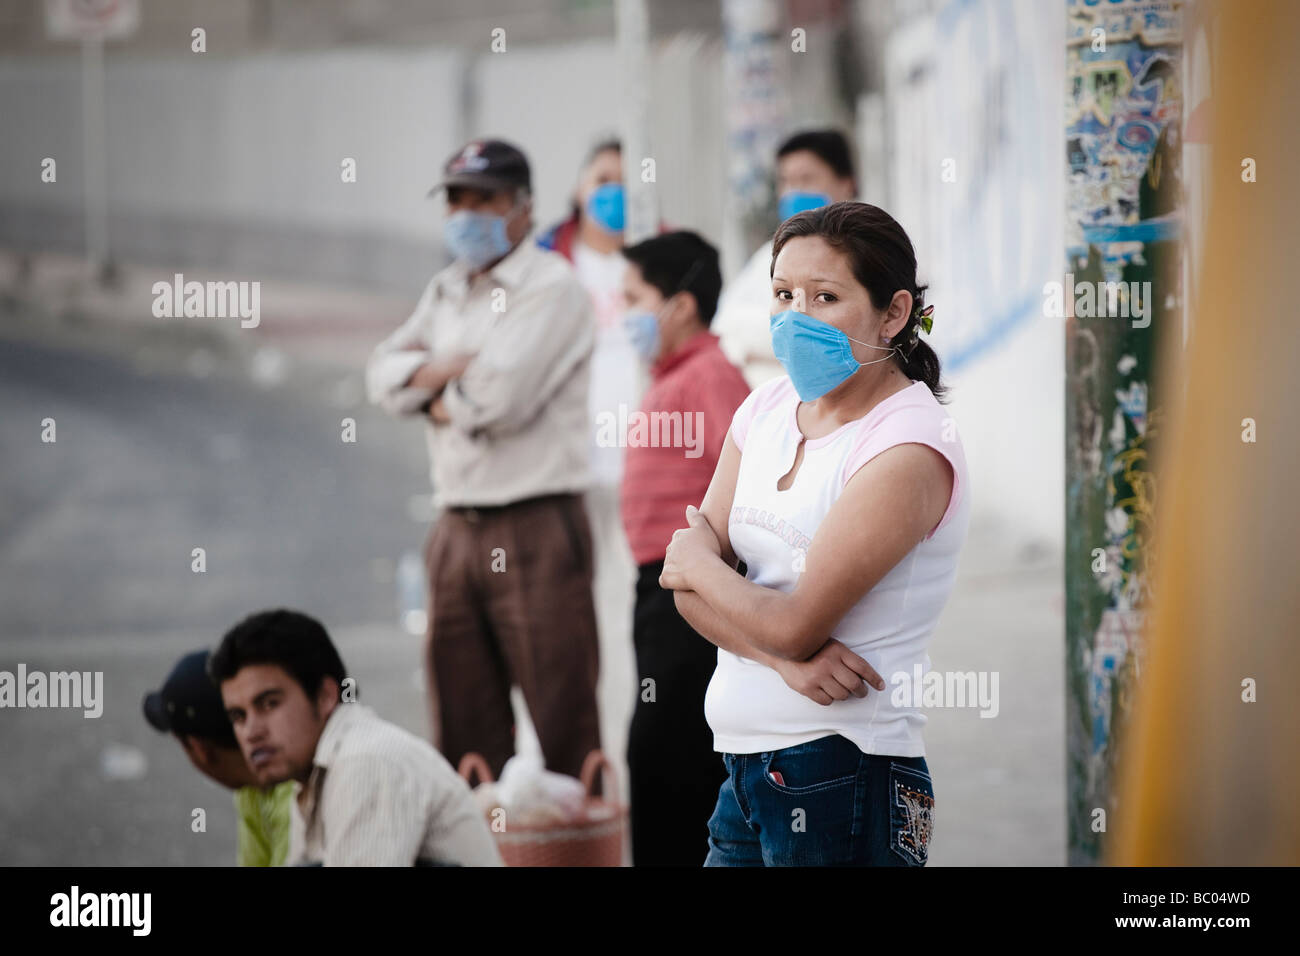 People wearing masks stand at a bus stop during the swine flu epidemic in Mexico City, DF, Mexico. Stock Photo